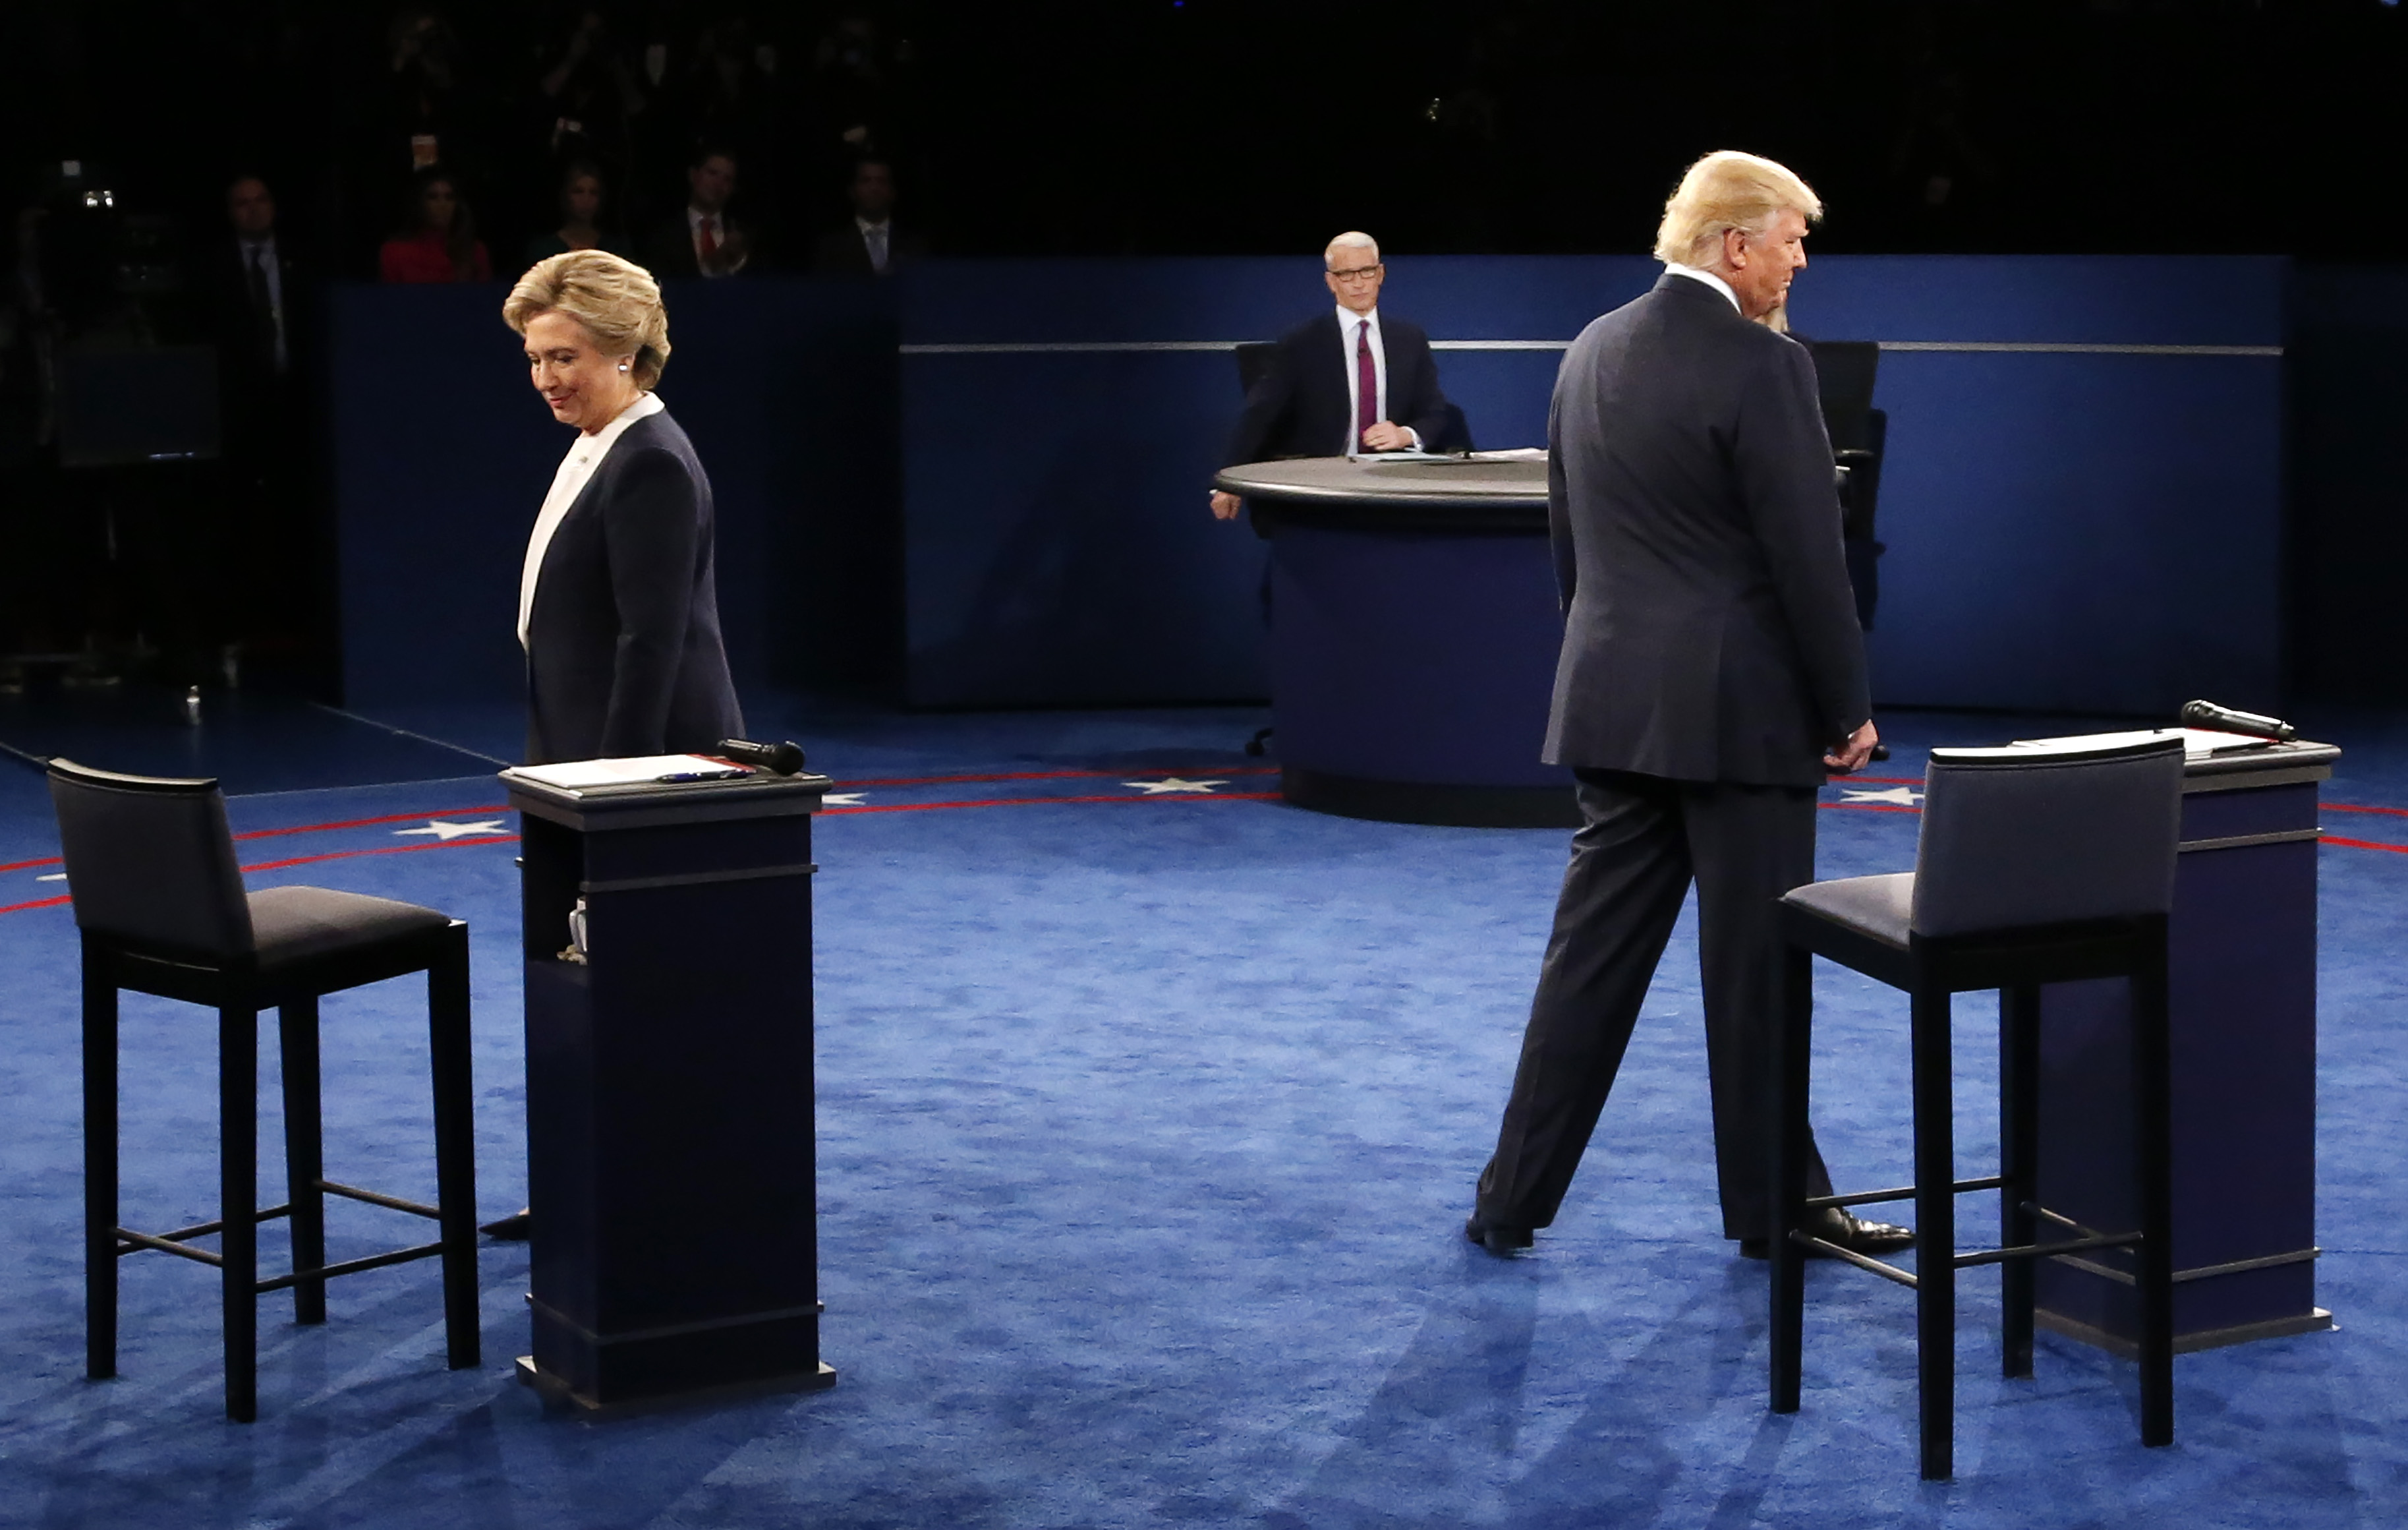 Democratic nominee Hillary Clinton (L) and Republican nominee Donald Trump arrive on stage during the second presidential debate at Washington University in St. Louis, Missouri on October 9, 2016. (Jim Bourg&mdash;AFP/Getty Images)